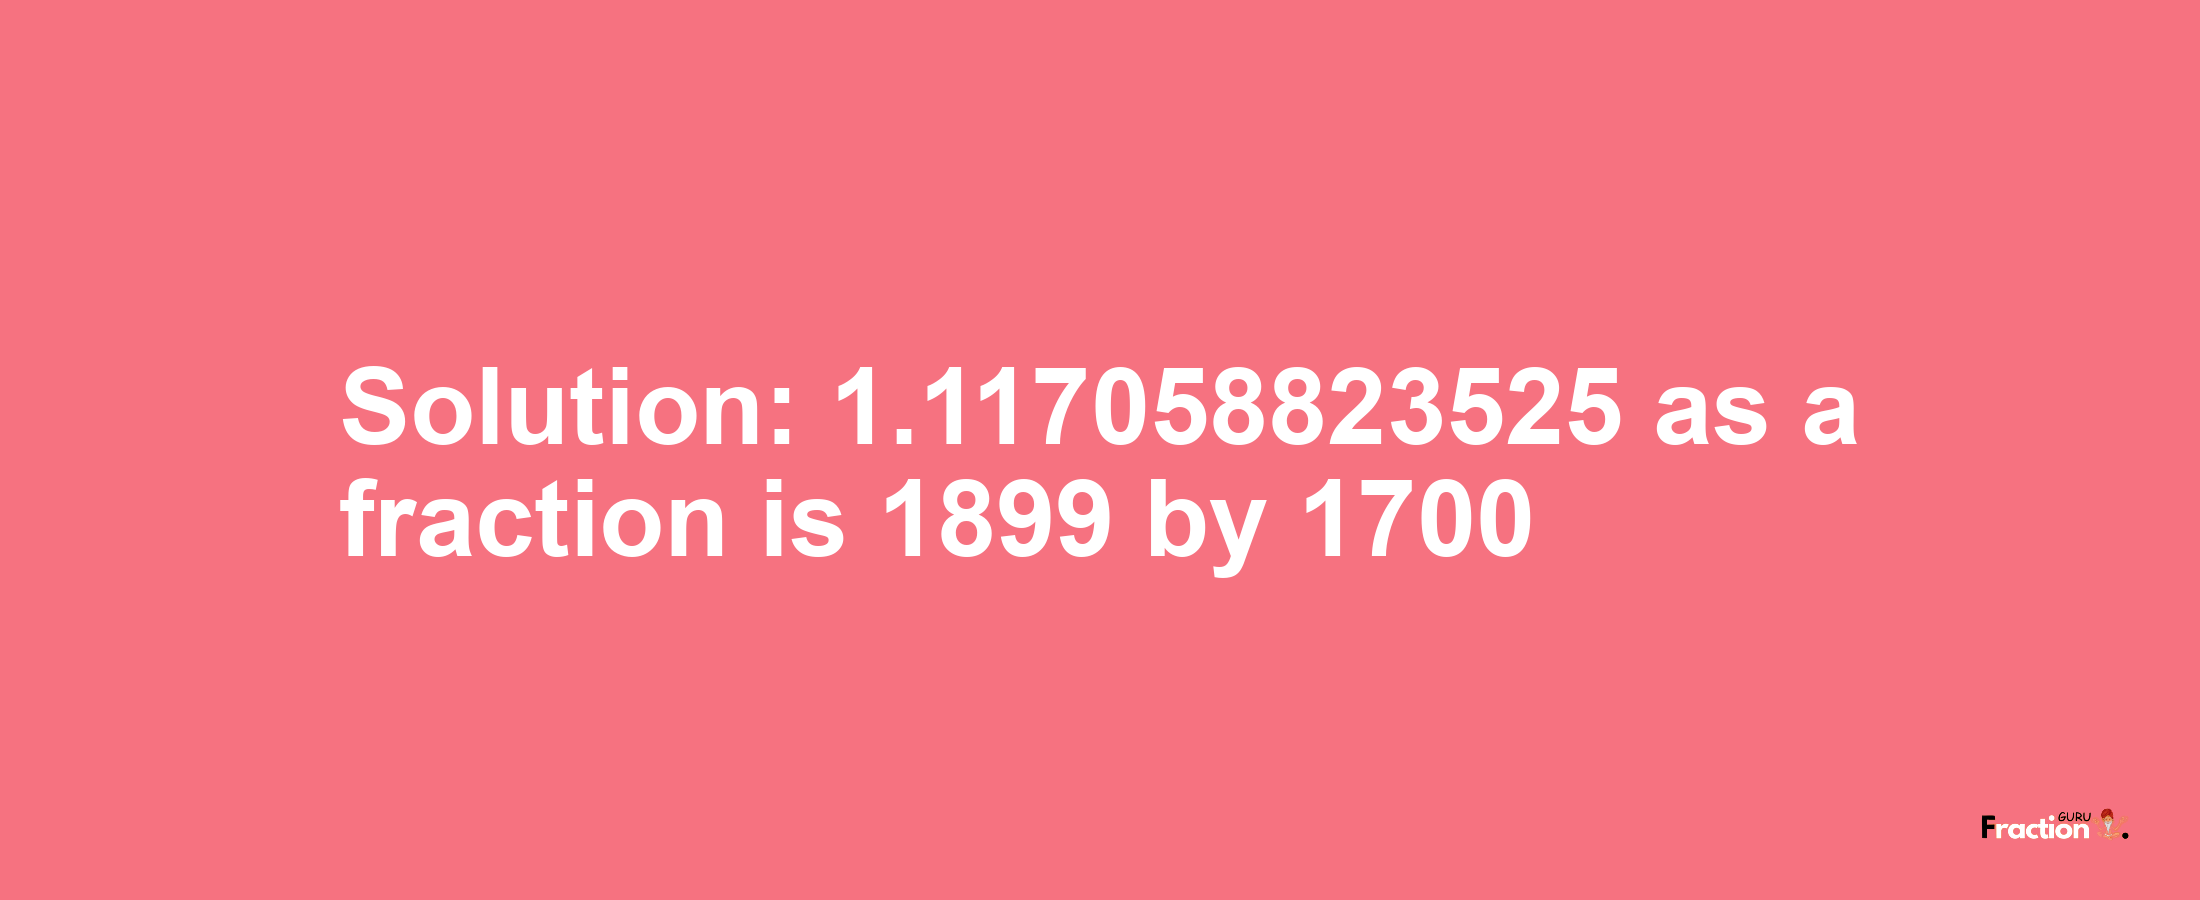 Solution:1.117058823525 as a fraction is 1899/1700